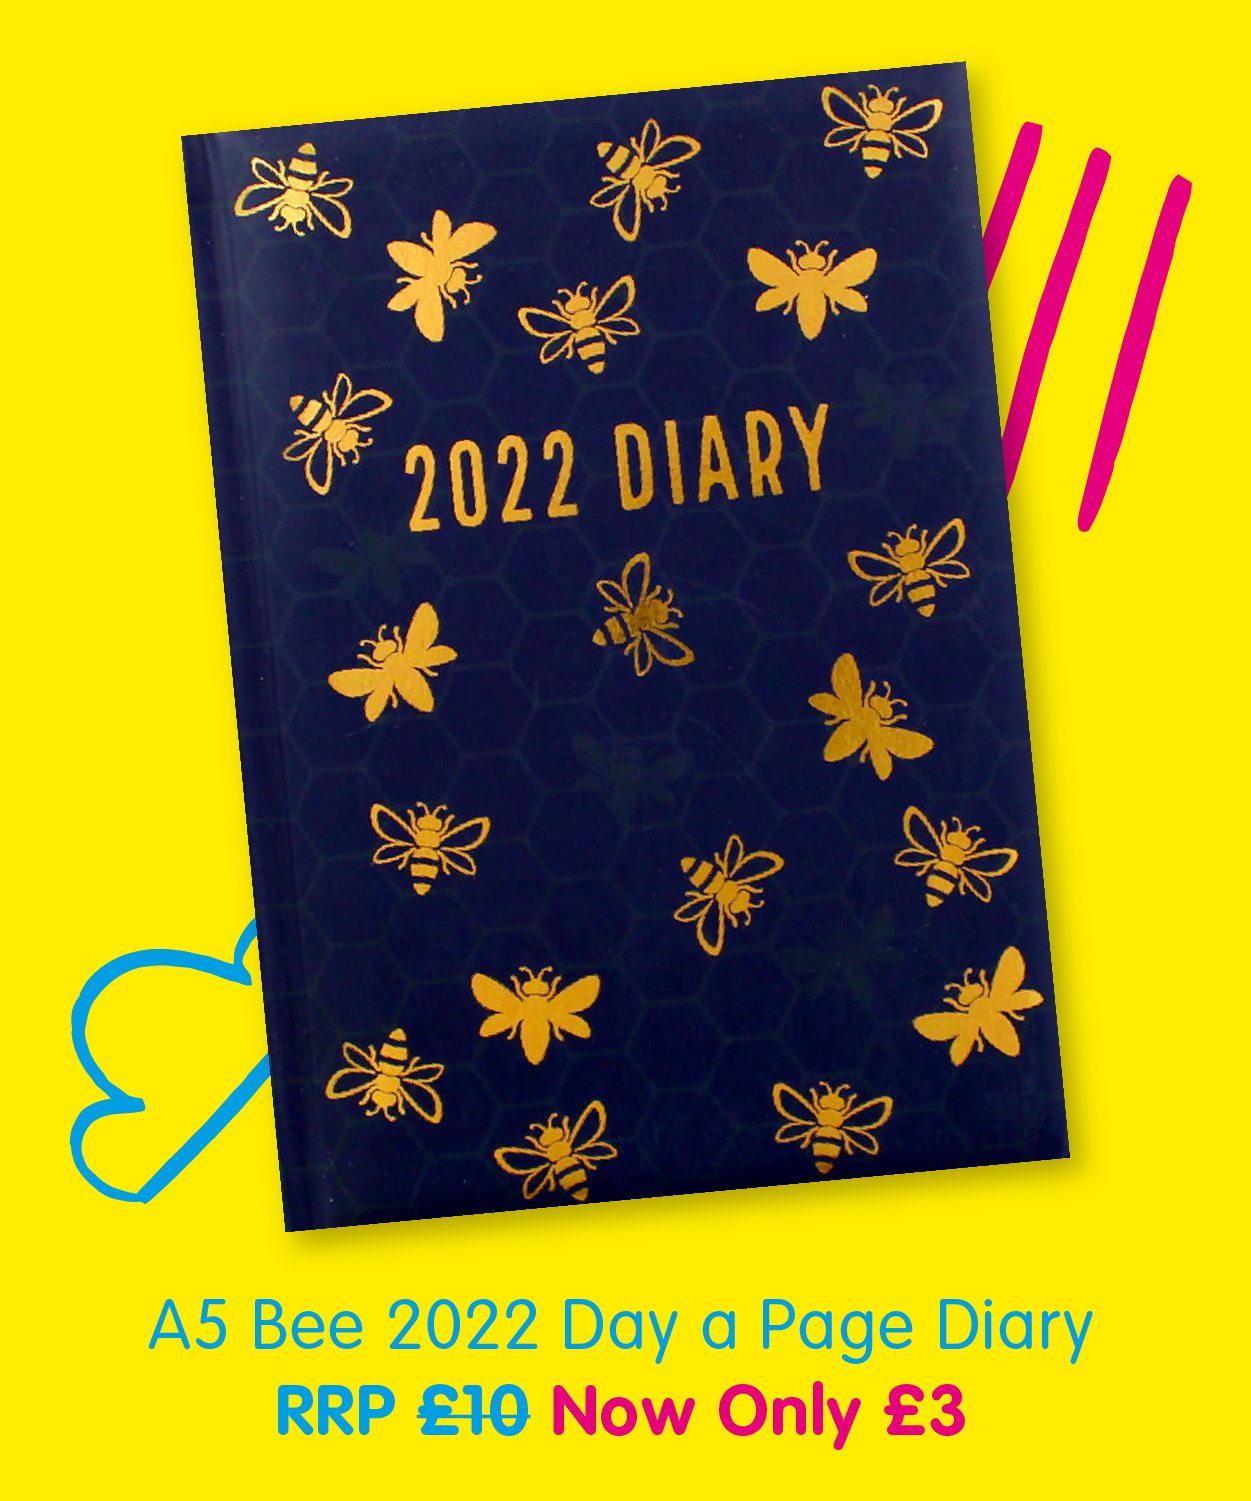 A5 Bee 2022 Day a Page Diary